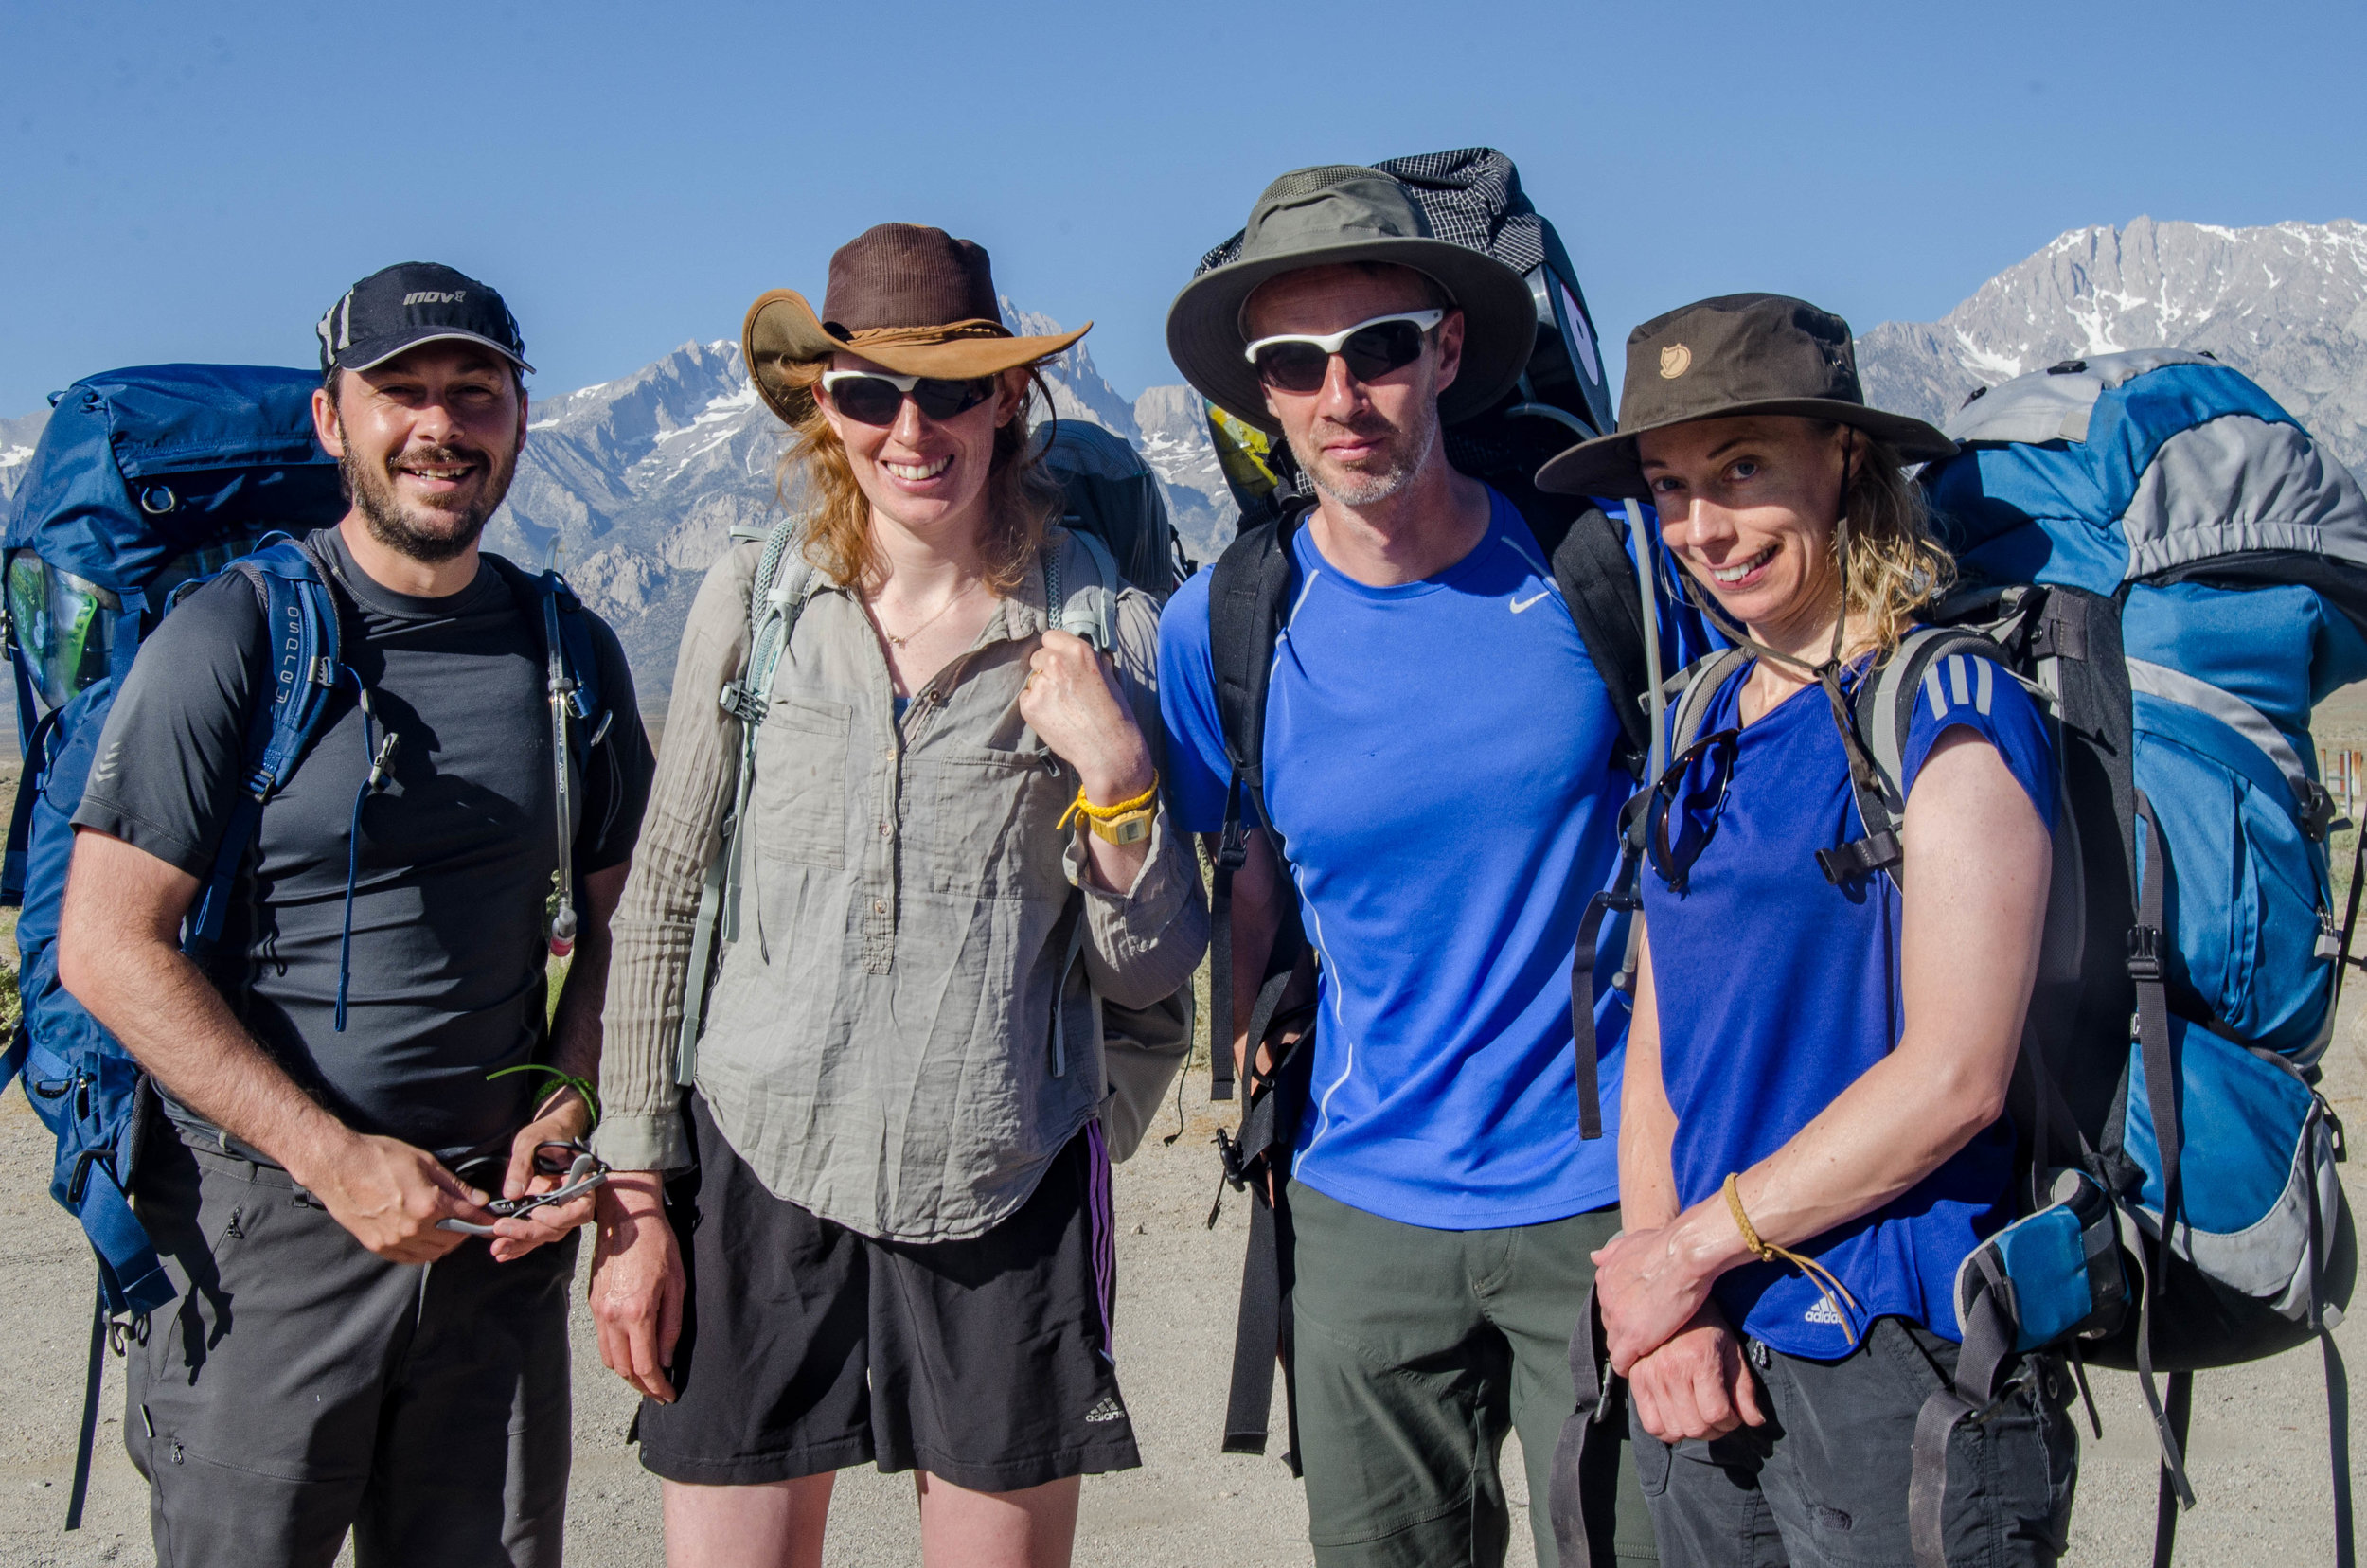 North Bound JMT Hikers from the UK Shelly, David, Juliet and Stuart